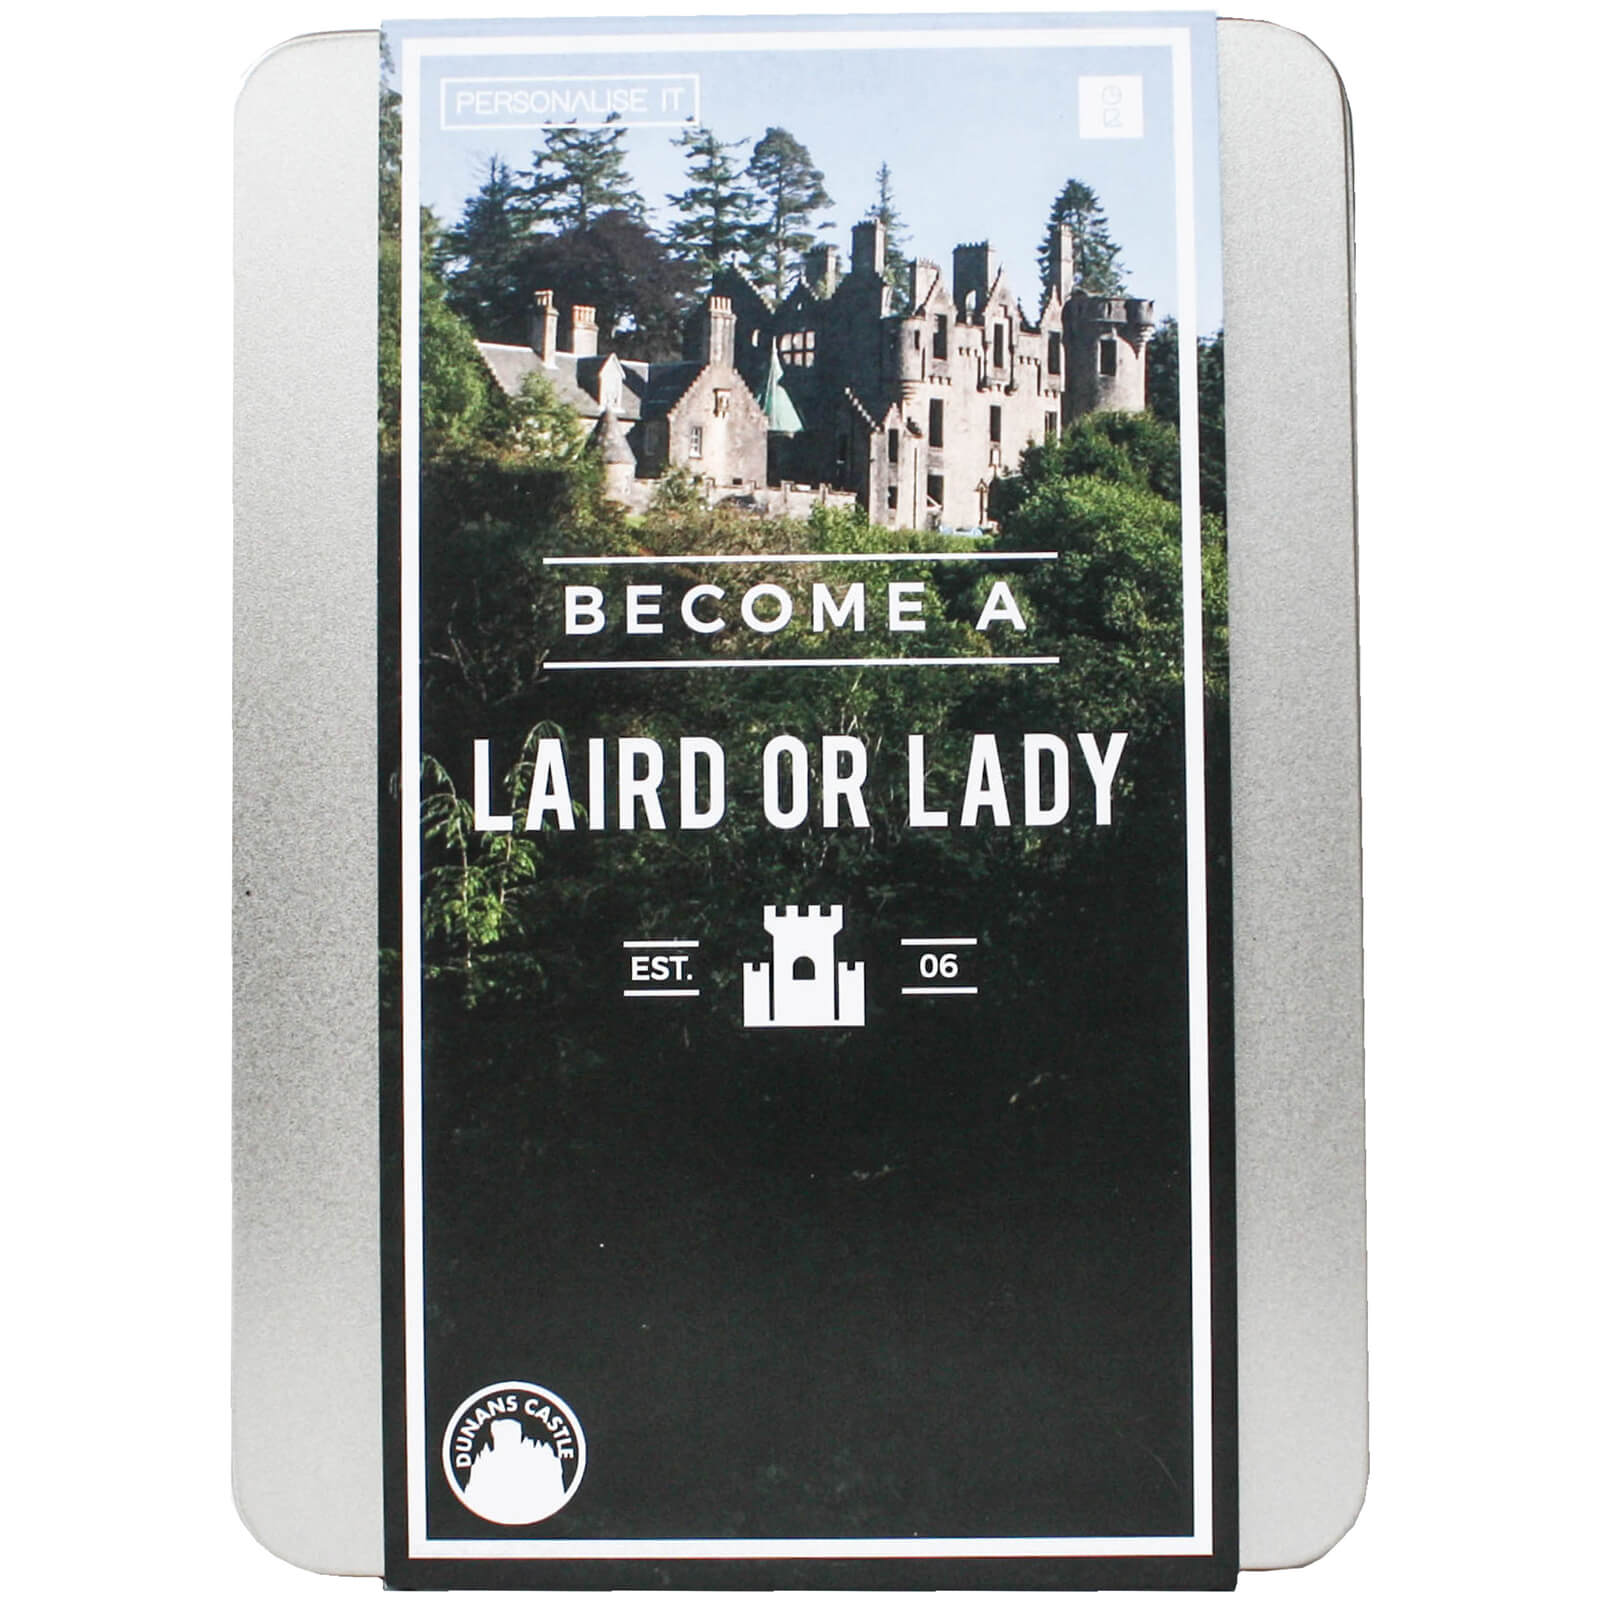 Become A Laird Or Lady Gift Box